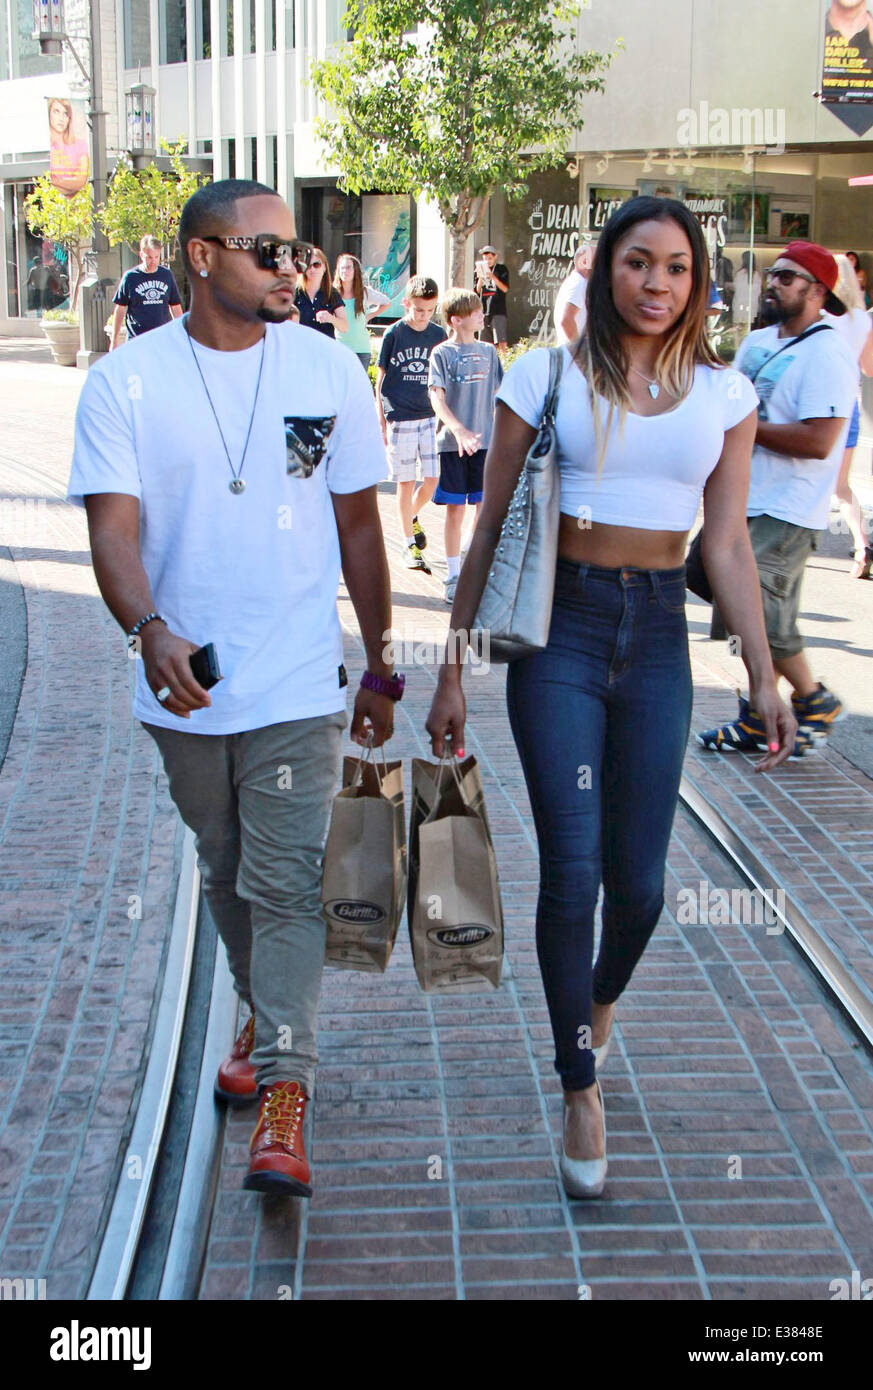 WWE' diva Cameron seen with a male companion shopping The Grove Featuring: Cameron,Ariane Andrew Where: Los Angeles, CA, Un Stock Photo -